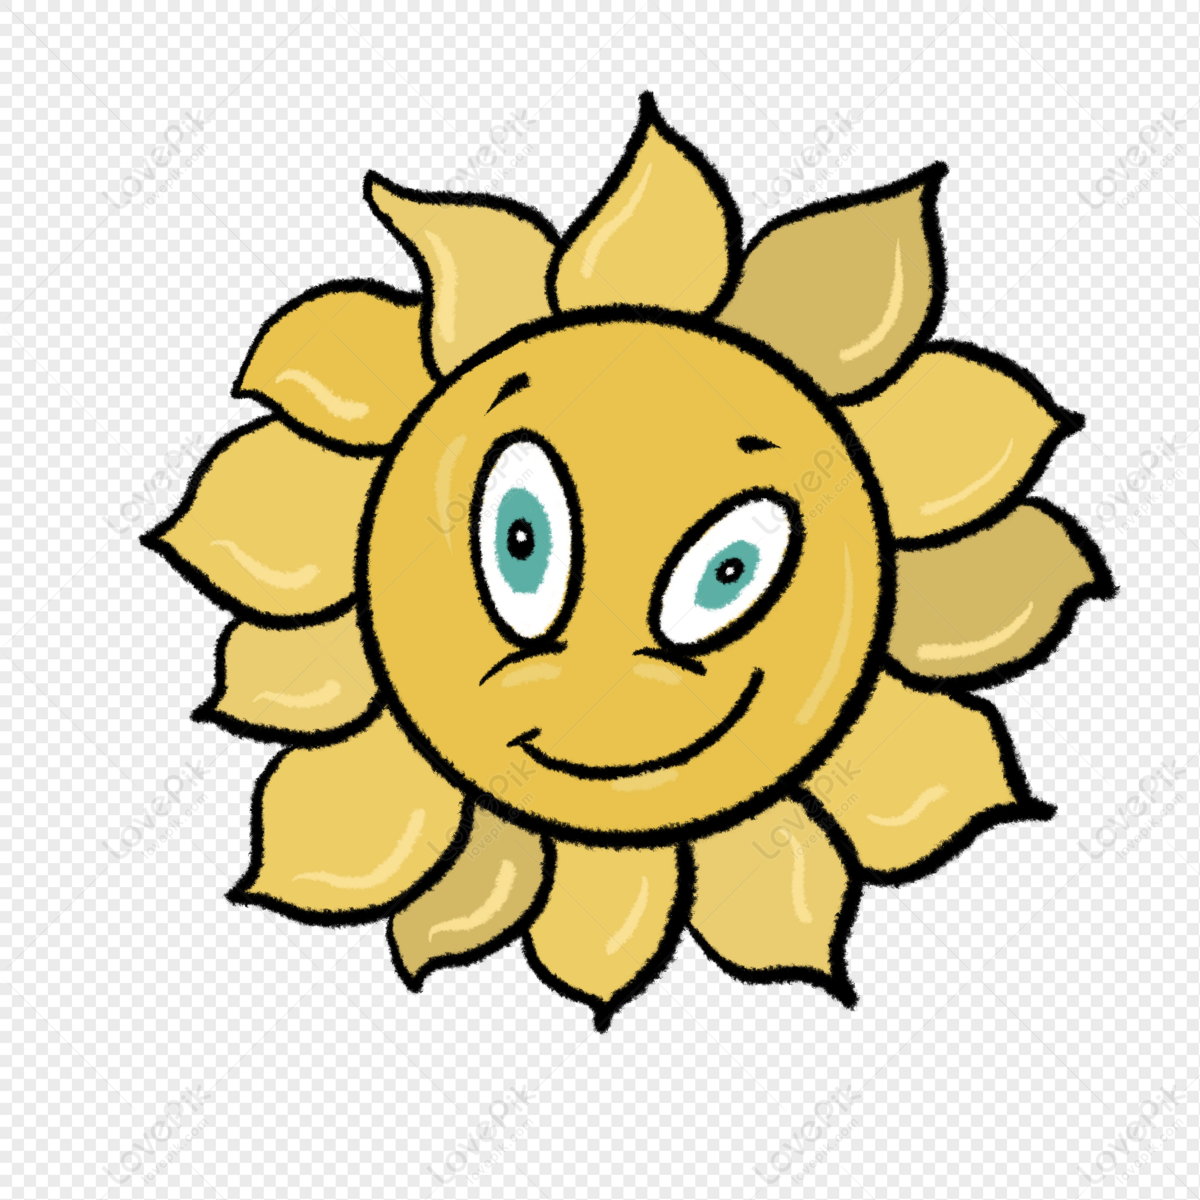 Cartoon Smiling Face Sun Mat Free Illustration Free PNG And Clipart Image  For Free Download - Lovepik | 401081889